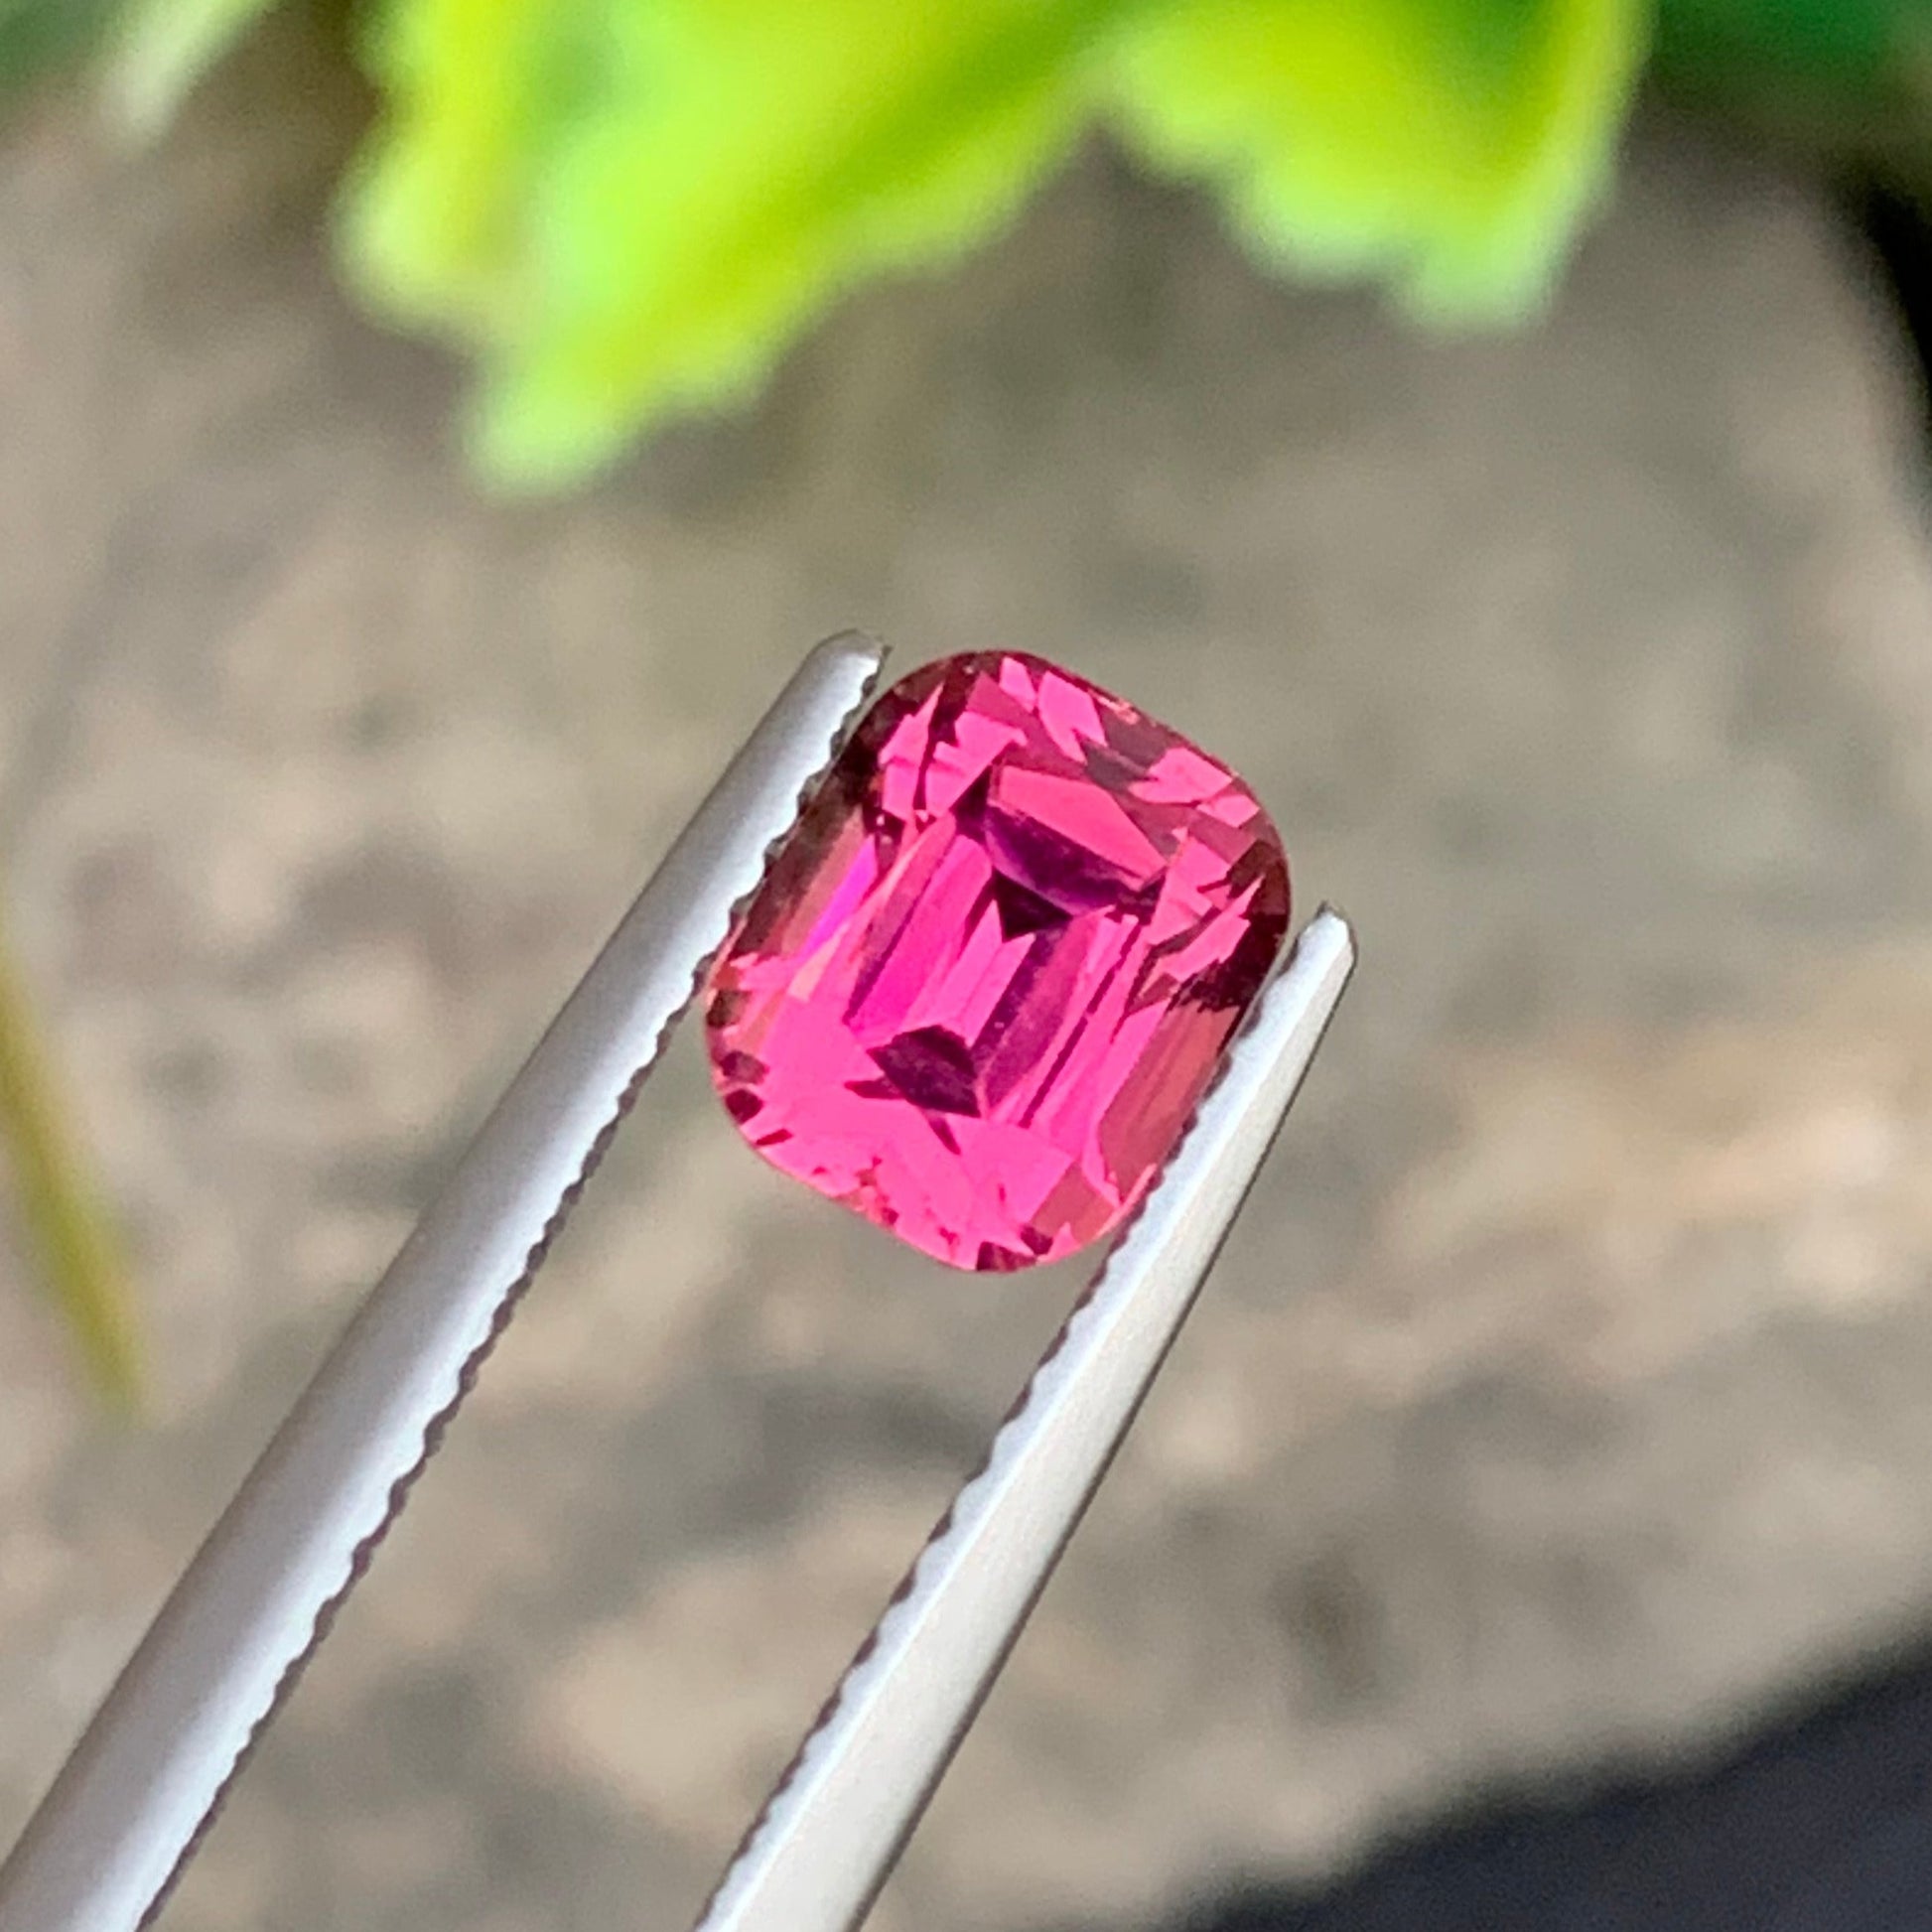 faceted pink rubellite tourmaline